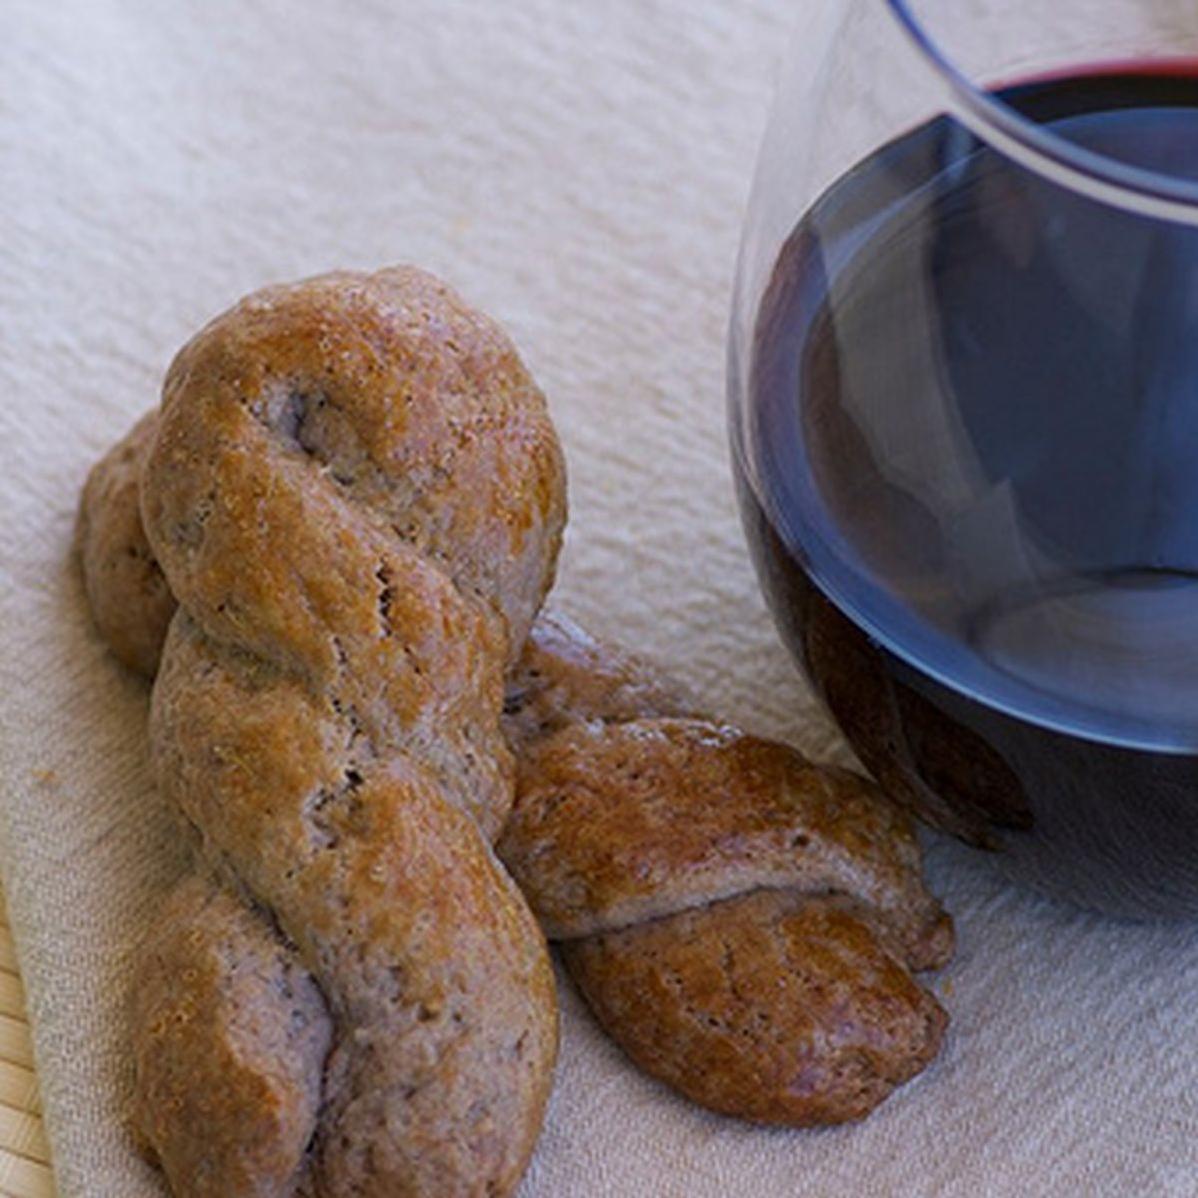  Looking for a sophisticated snack to impress your guests? Look no further than these homemade wine crackers.